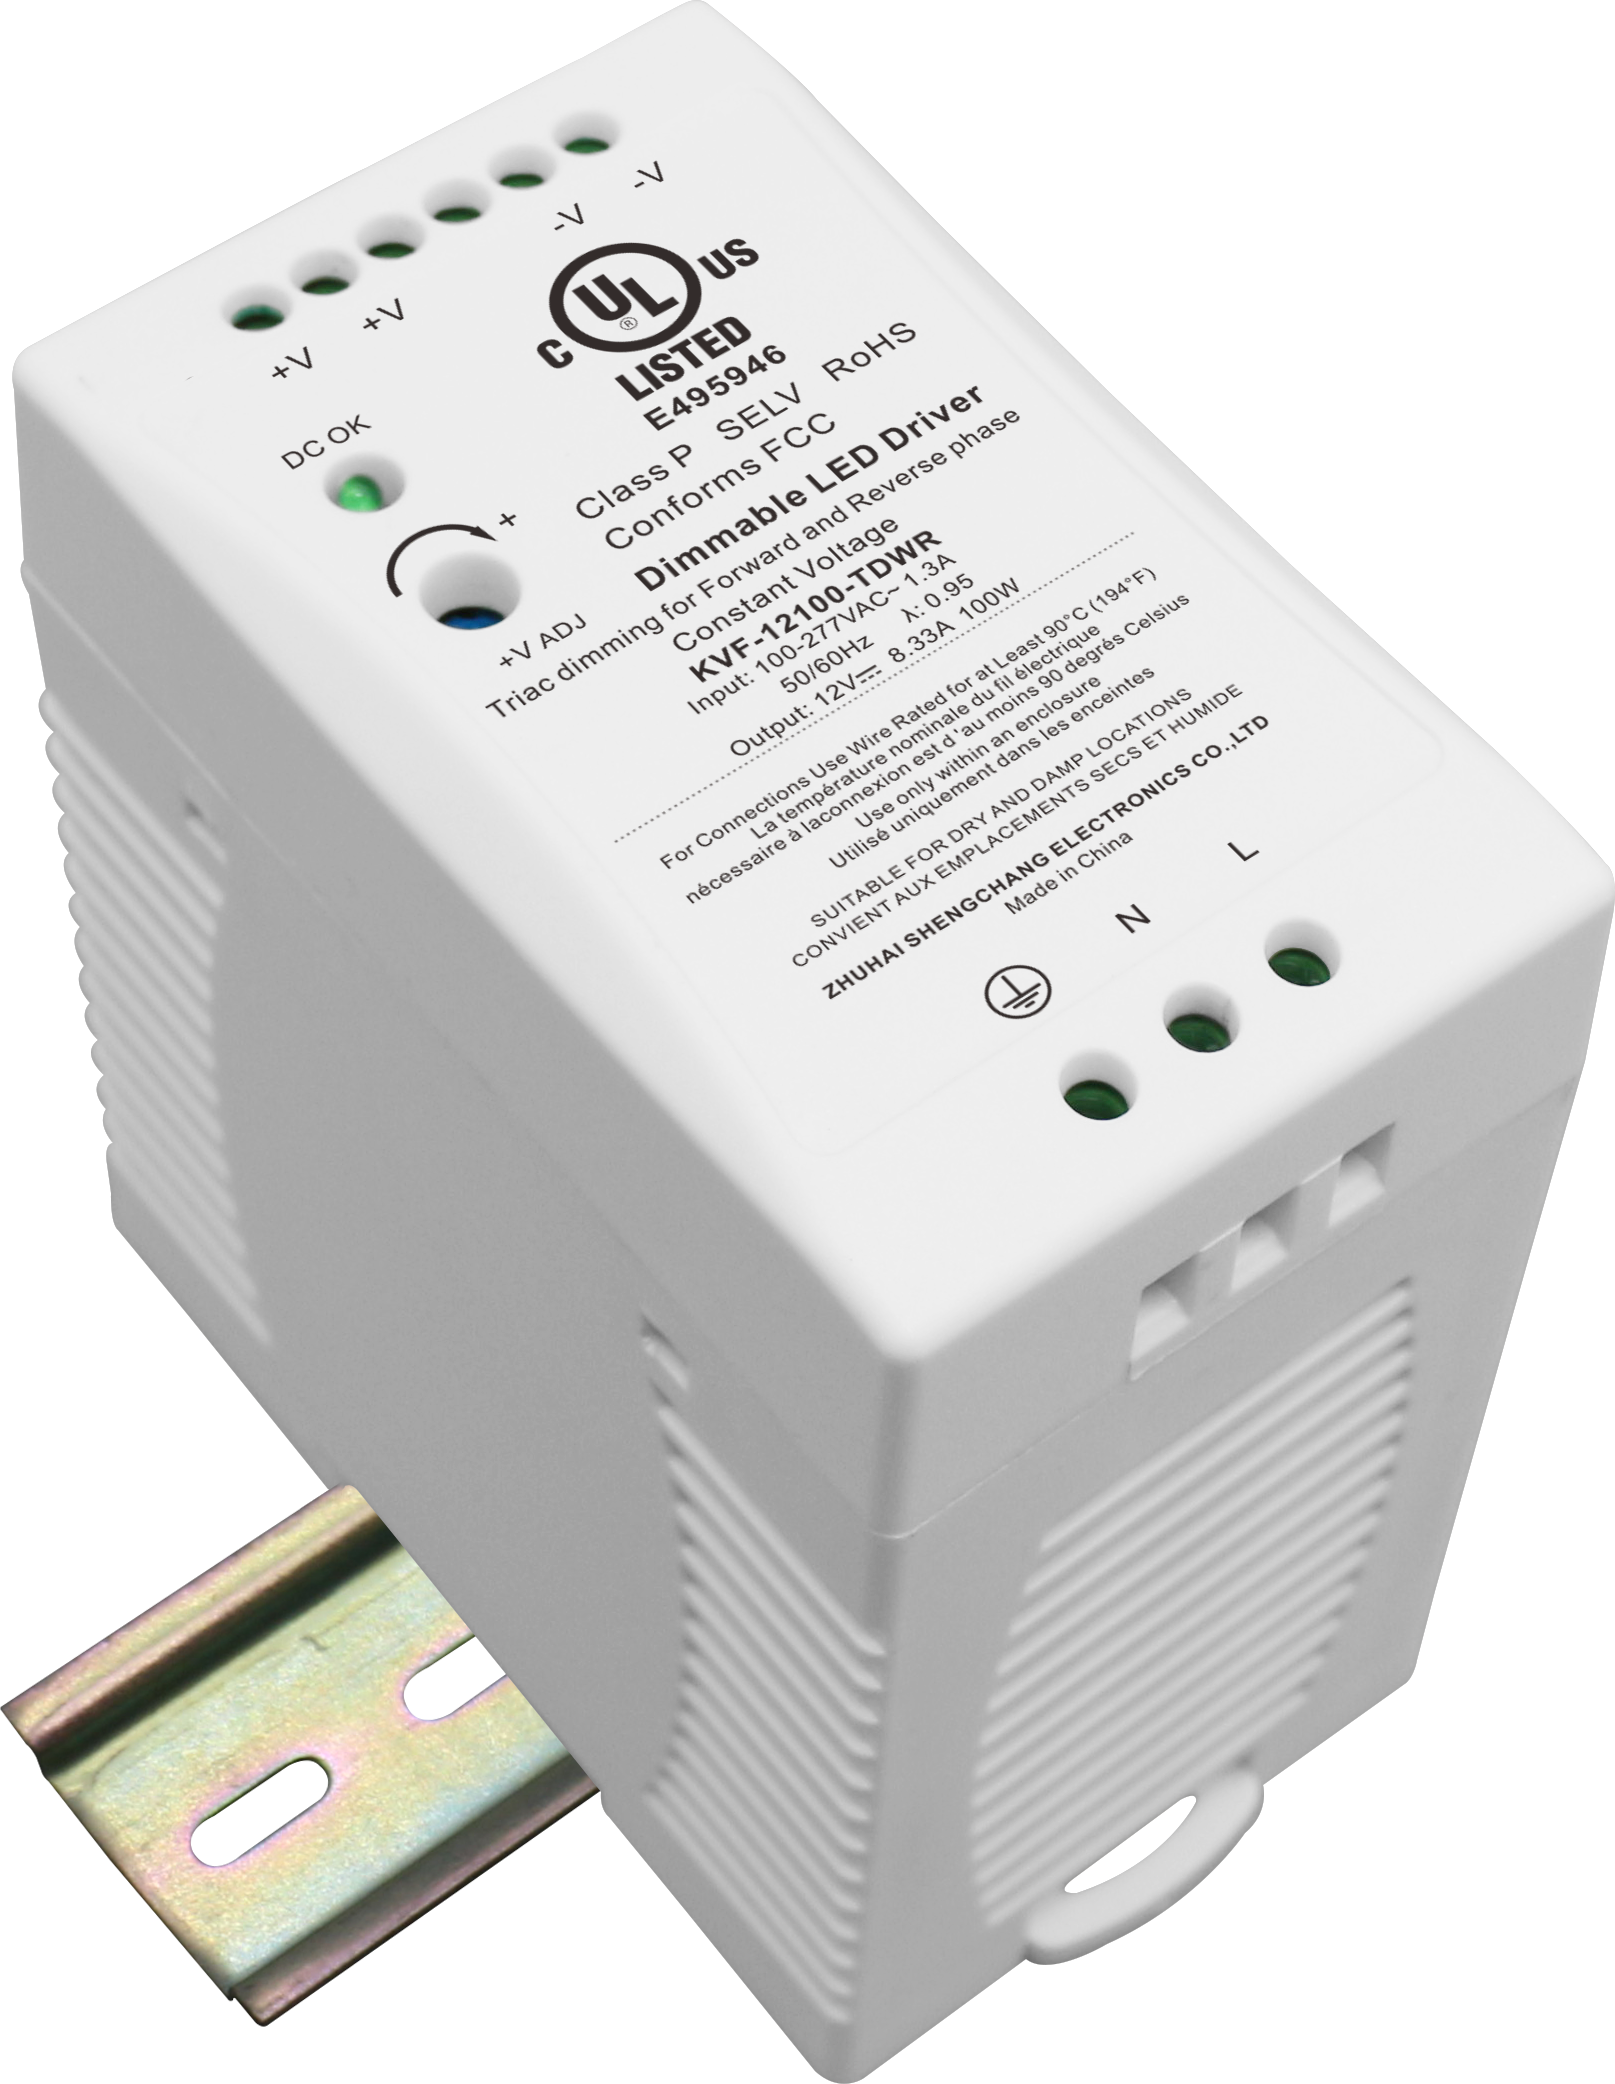 KVF-TDWR Series 96W Constant Voltage Triac Dimmable LED driver